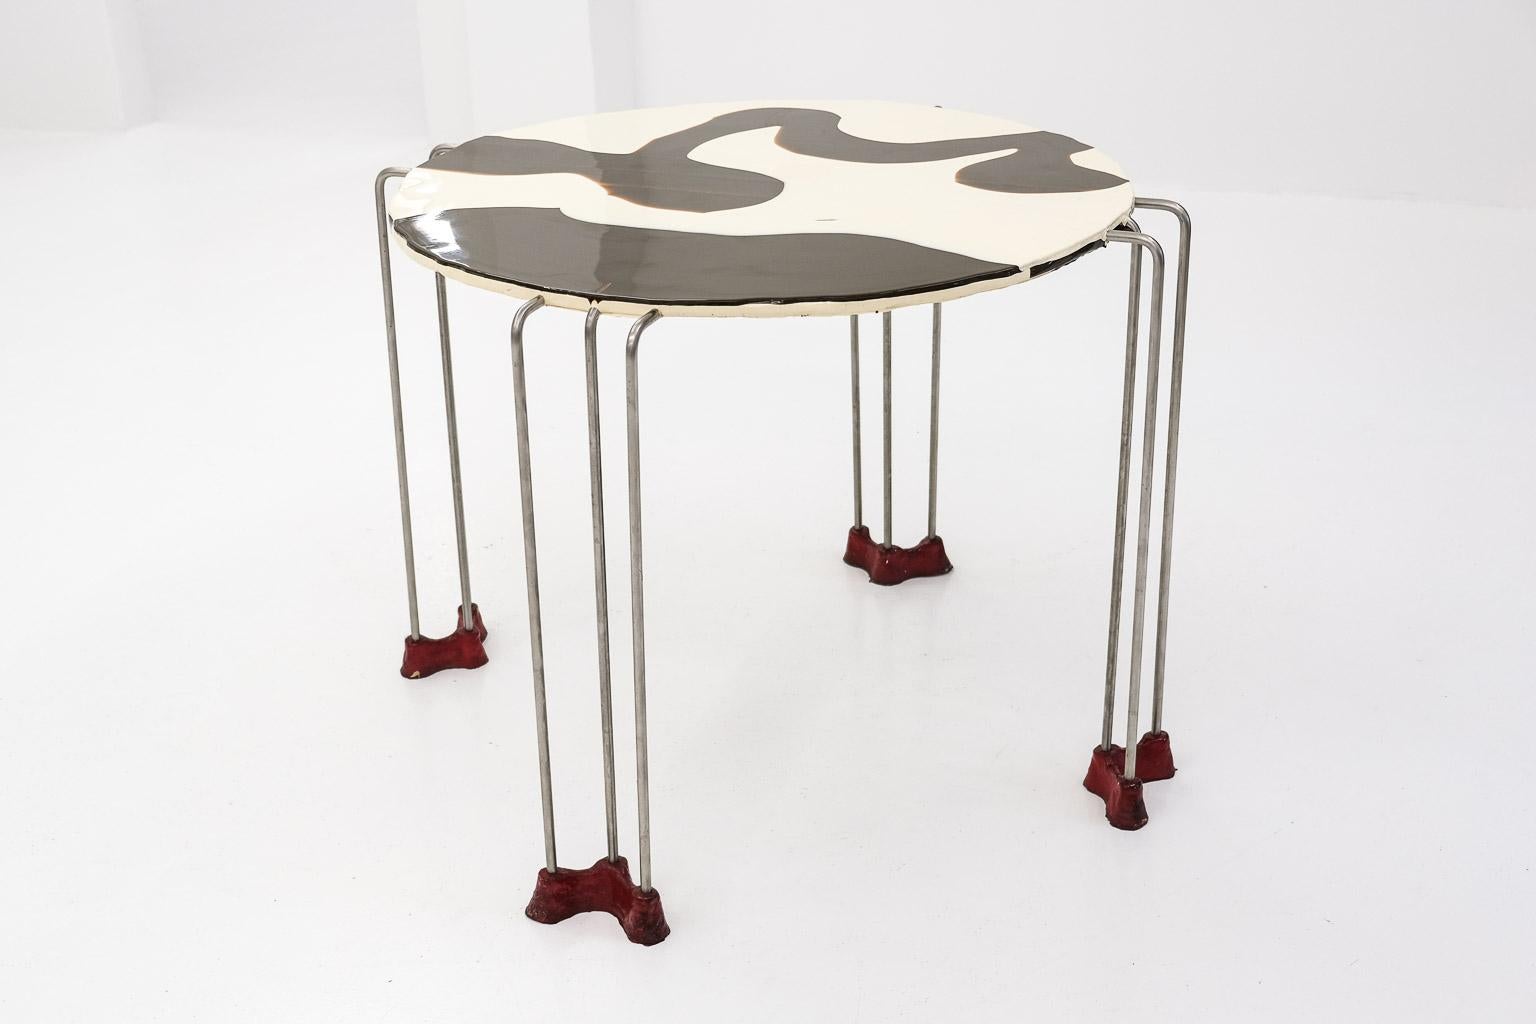 Italian Triple Play Dining Table by Gaetano Pesce for Fish Design, Nr. 1/2016